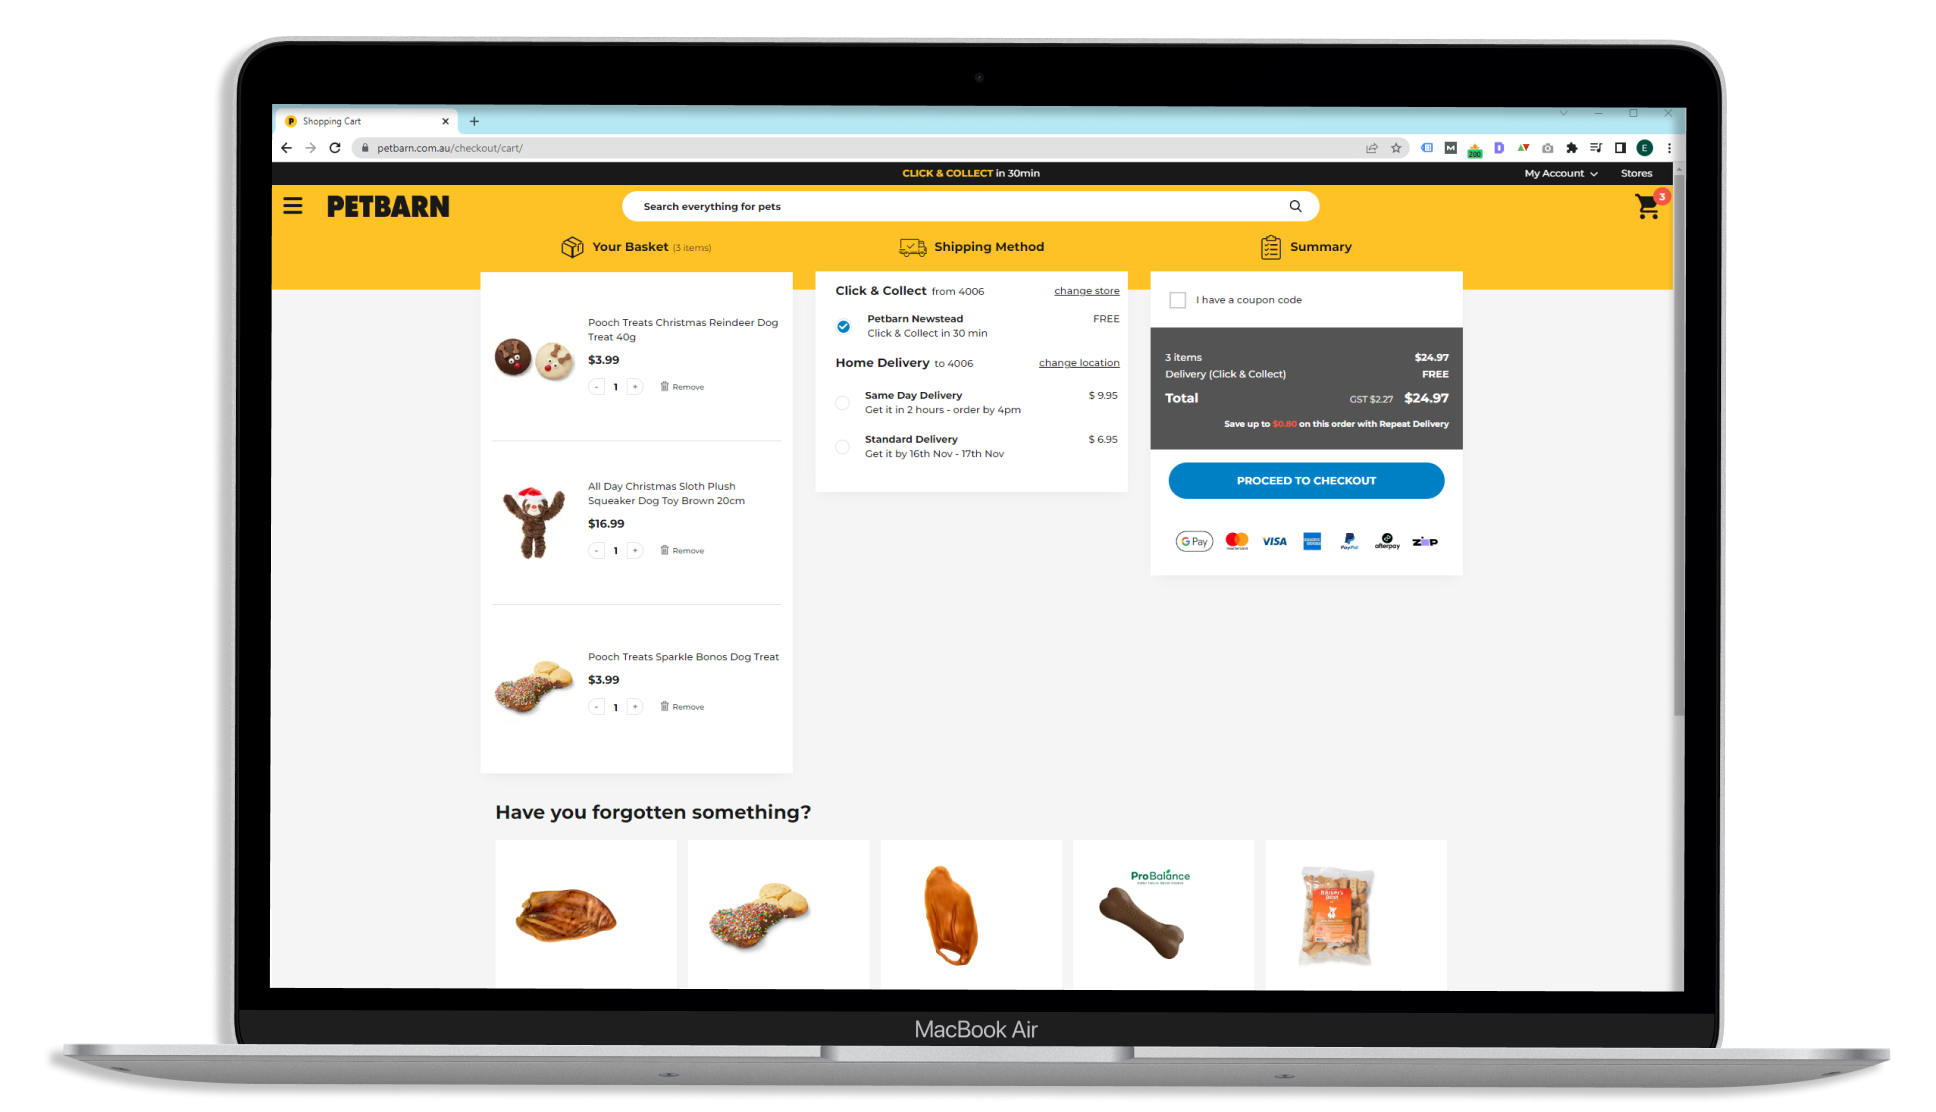 example of checkout using petbarn and what we would get for maple